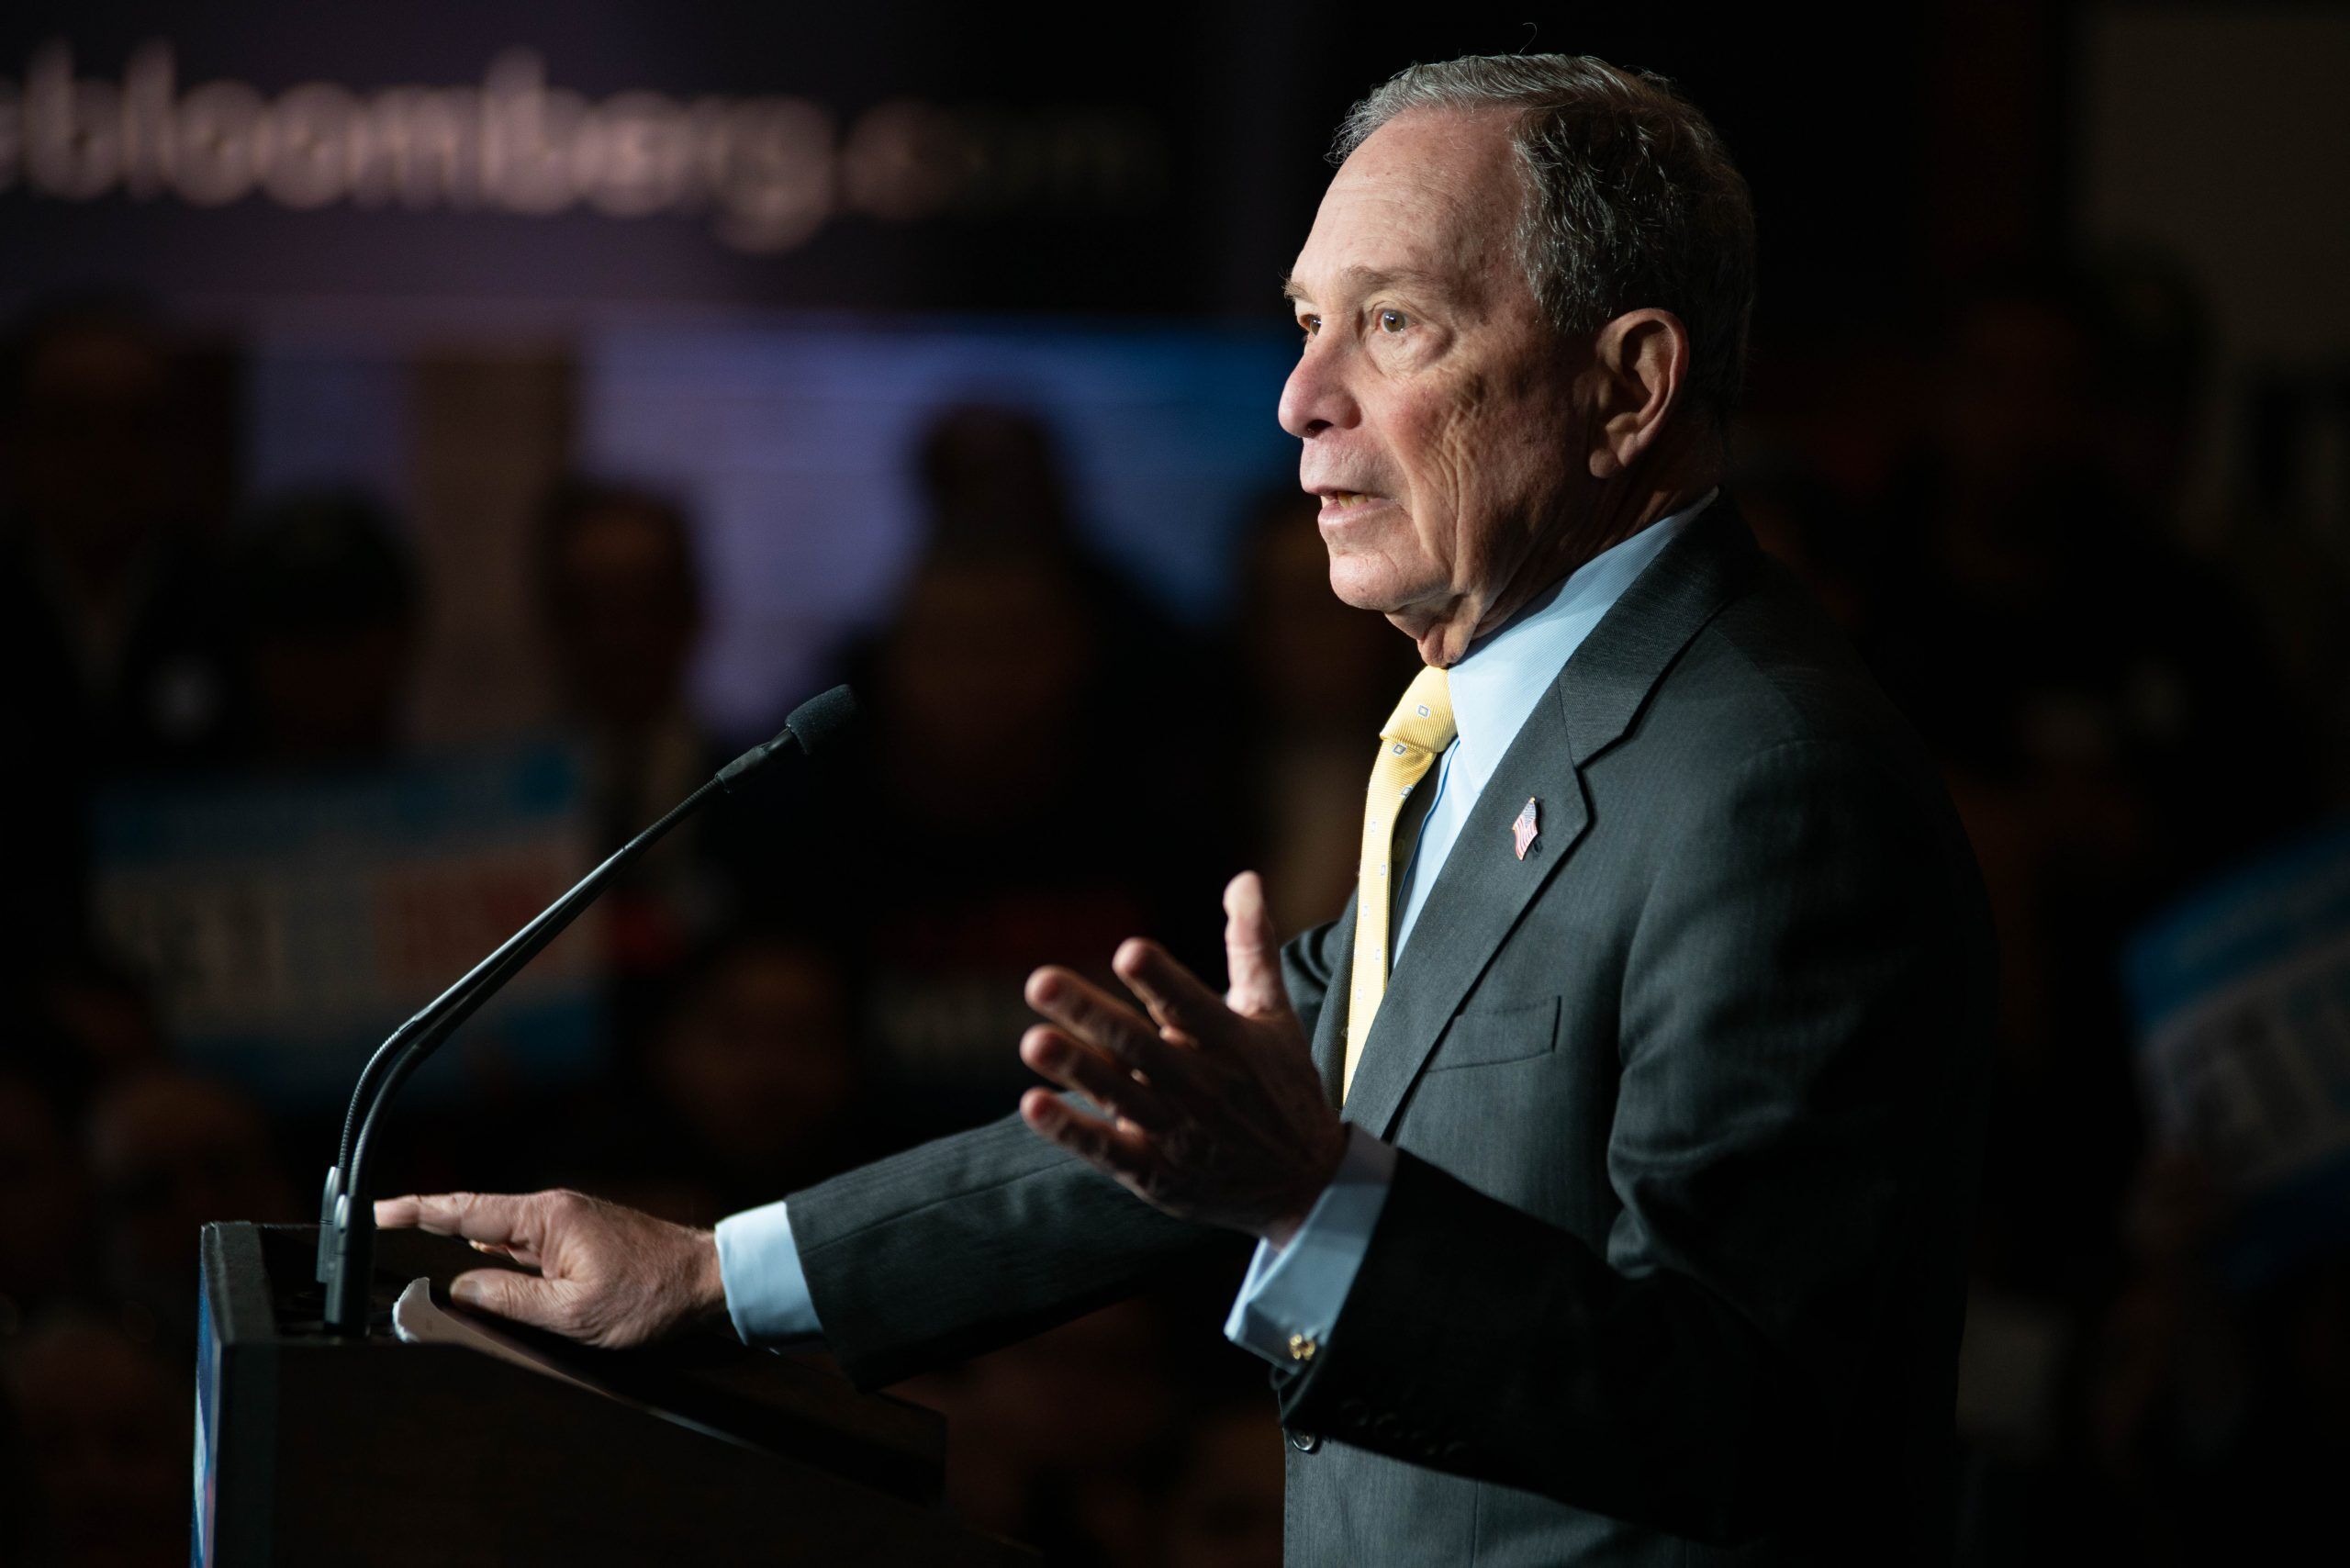 Democratic presidential candidate Michael Bloomberg addresses a crowd in Detroit, MI.